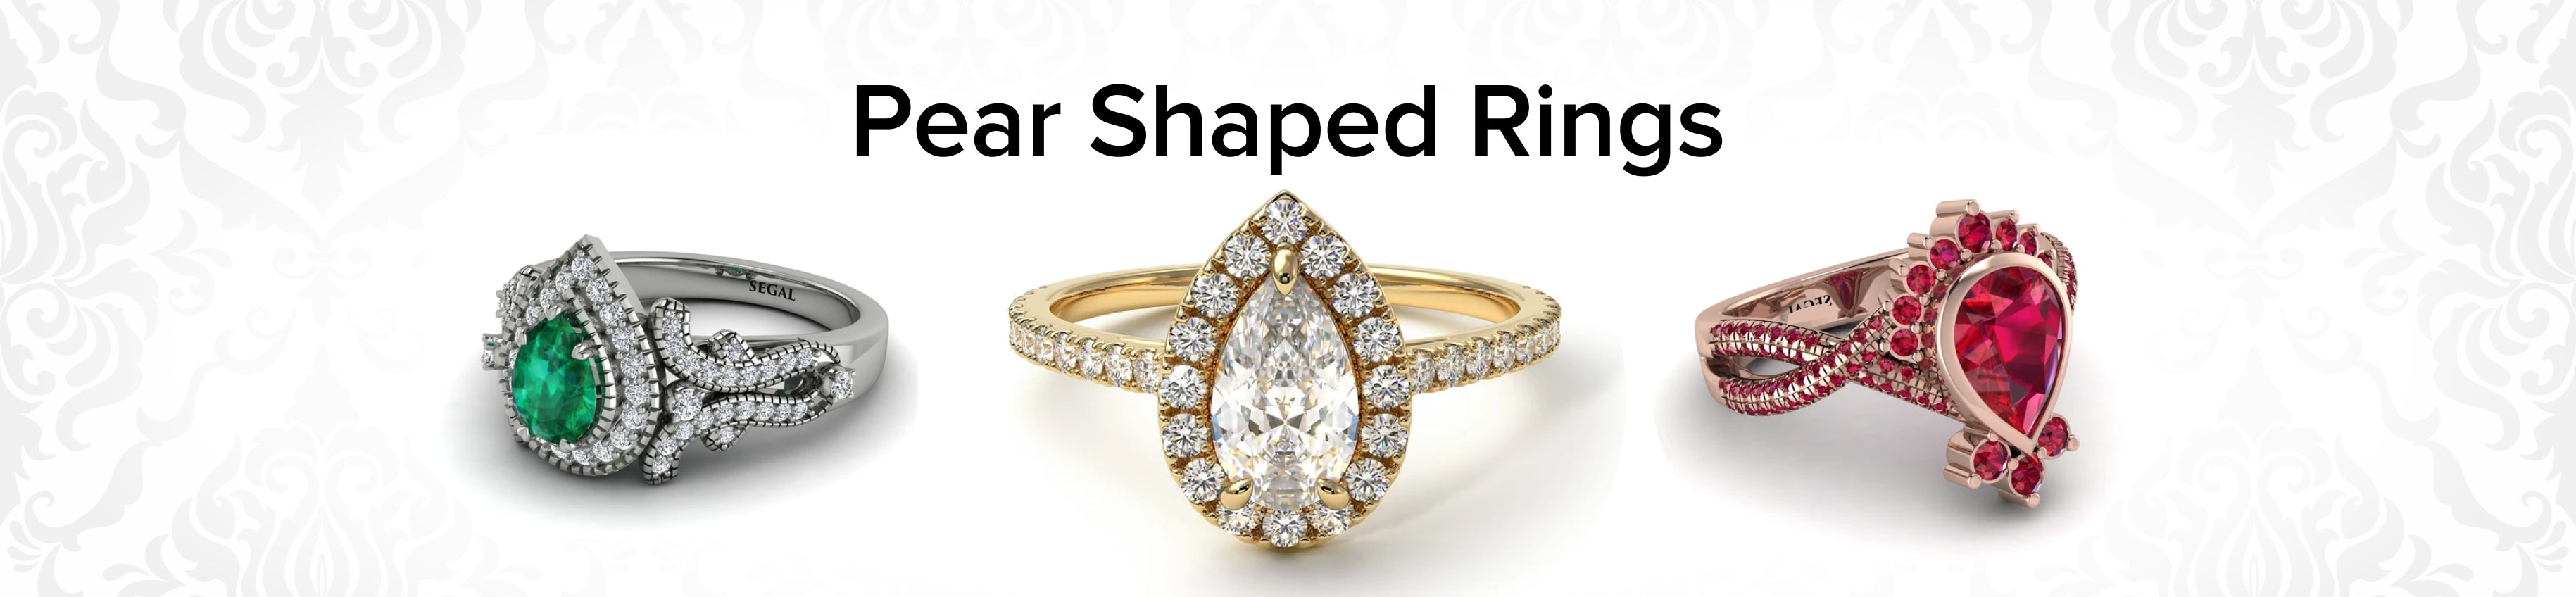 Pear Shaped Engagement Rings Banner